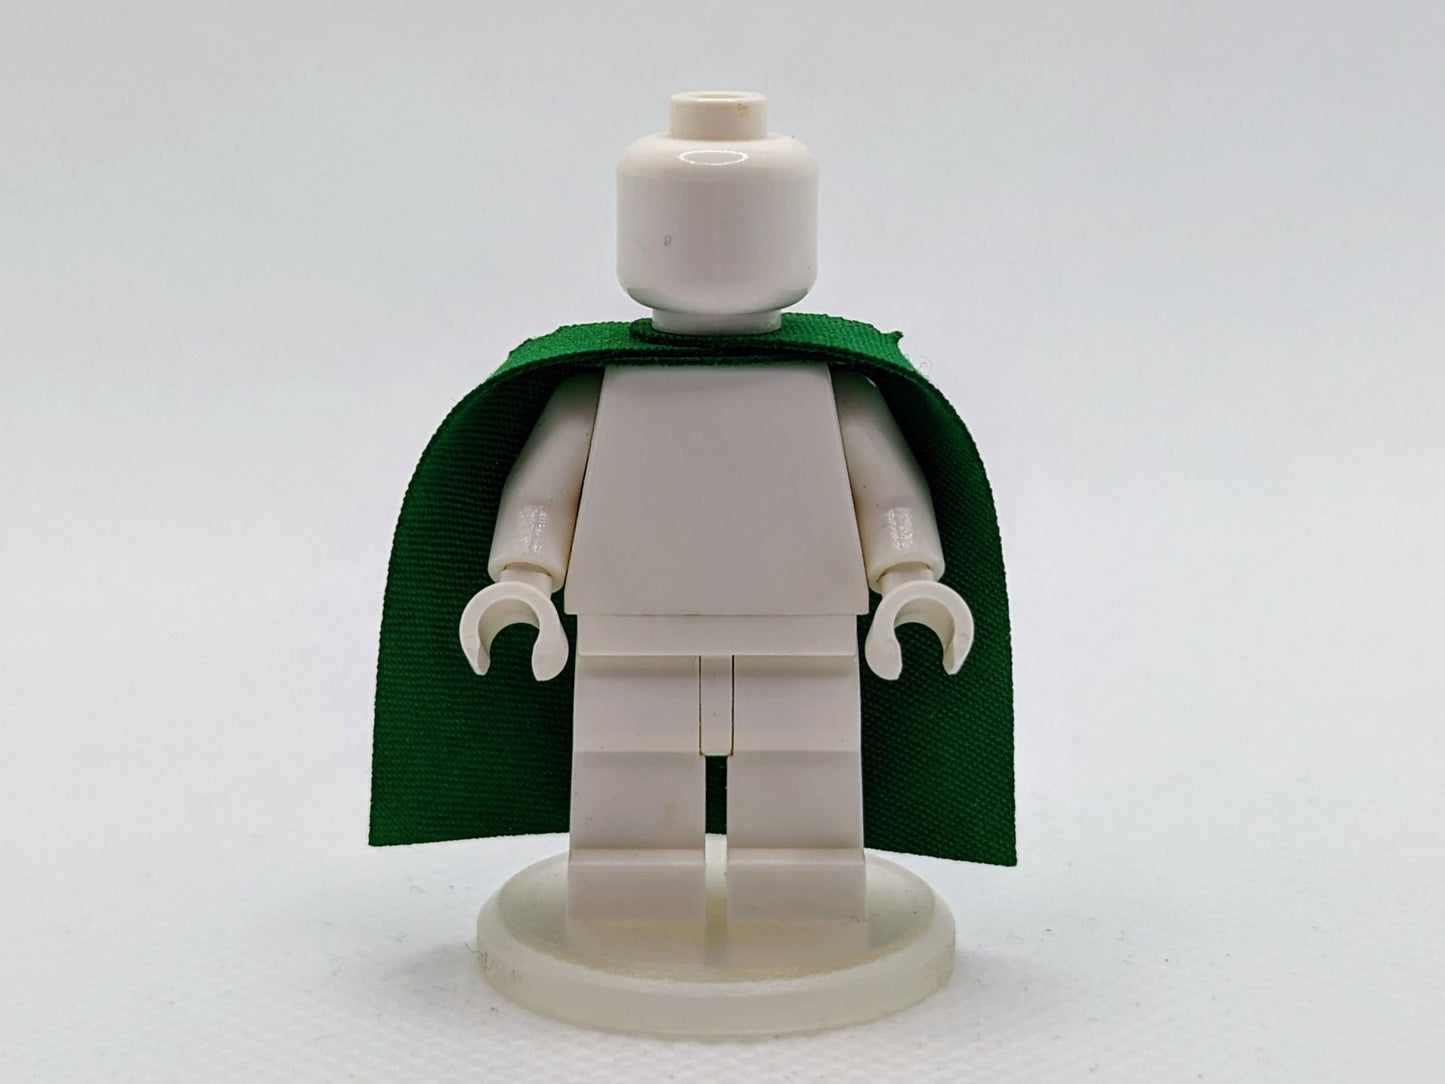 Over-Shoulder Cape by capes4minifigs - RPGminifigs